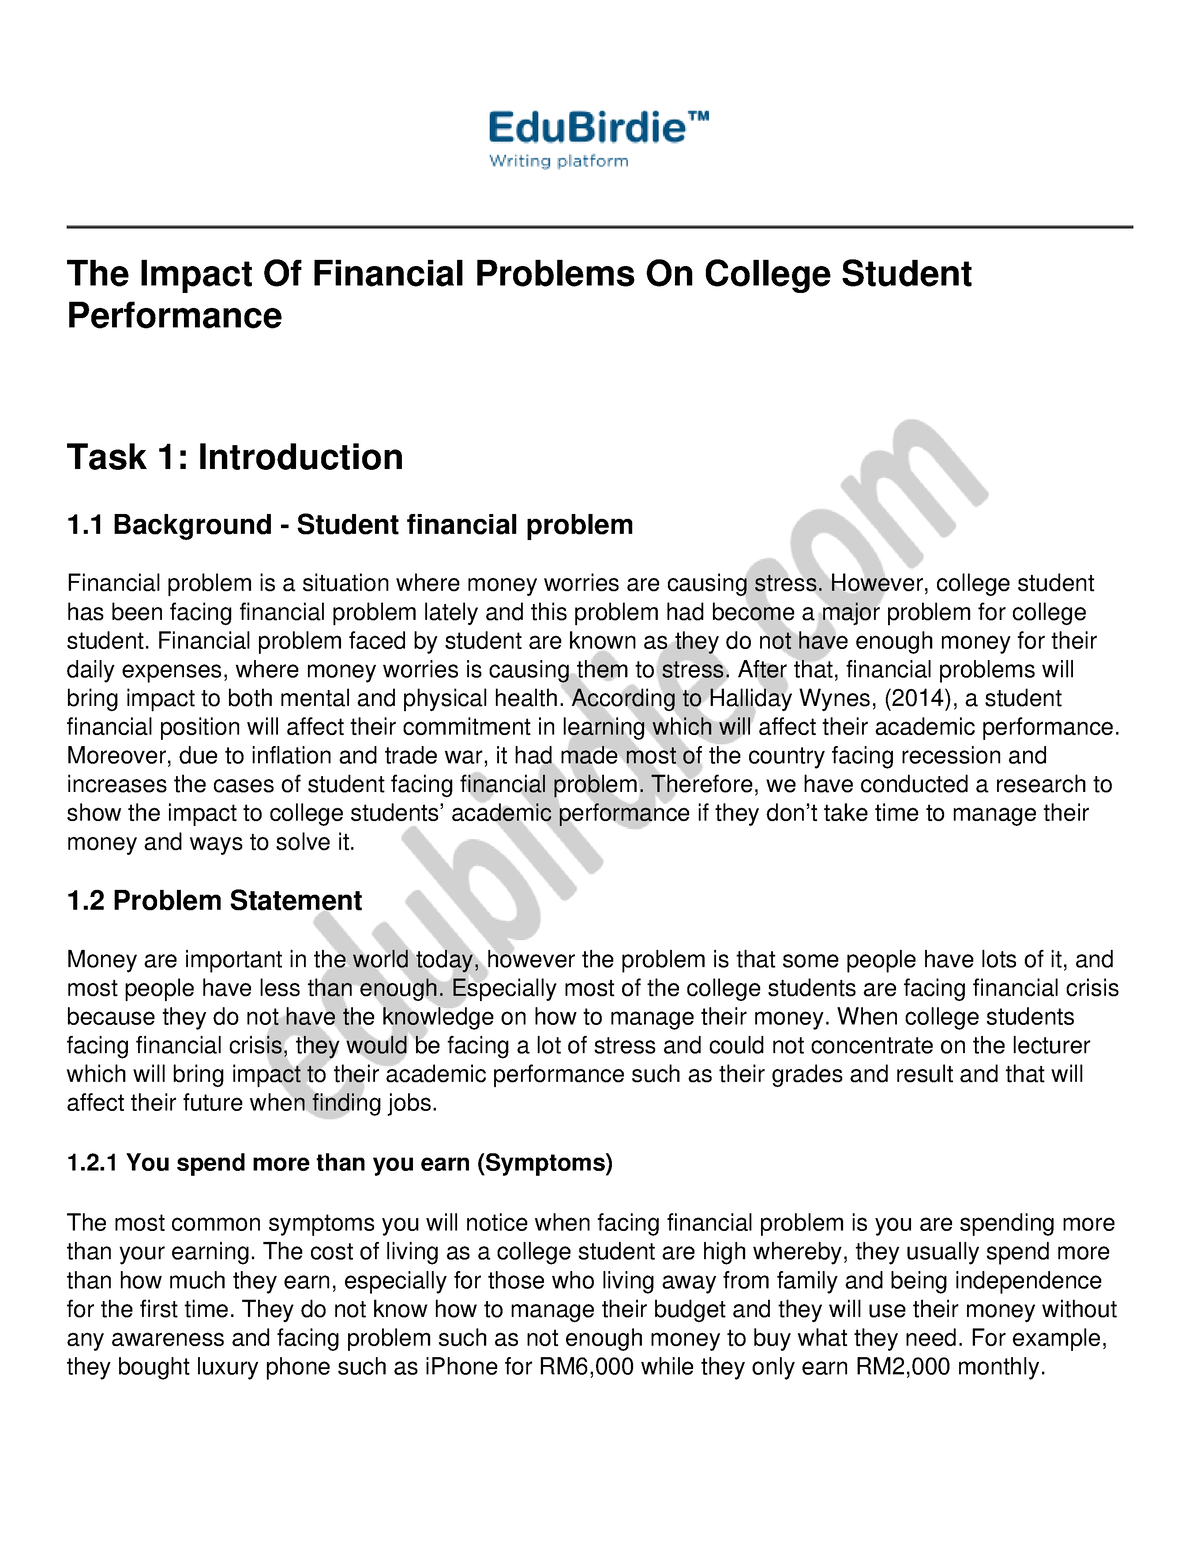 qualitative research about financial problem of students